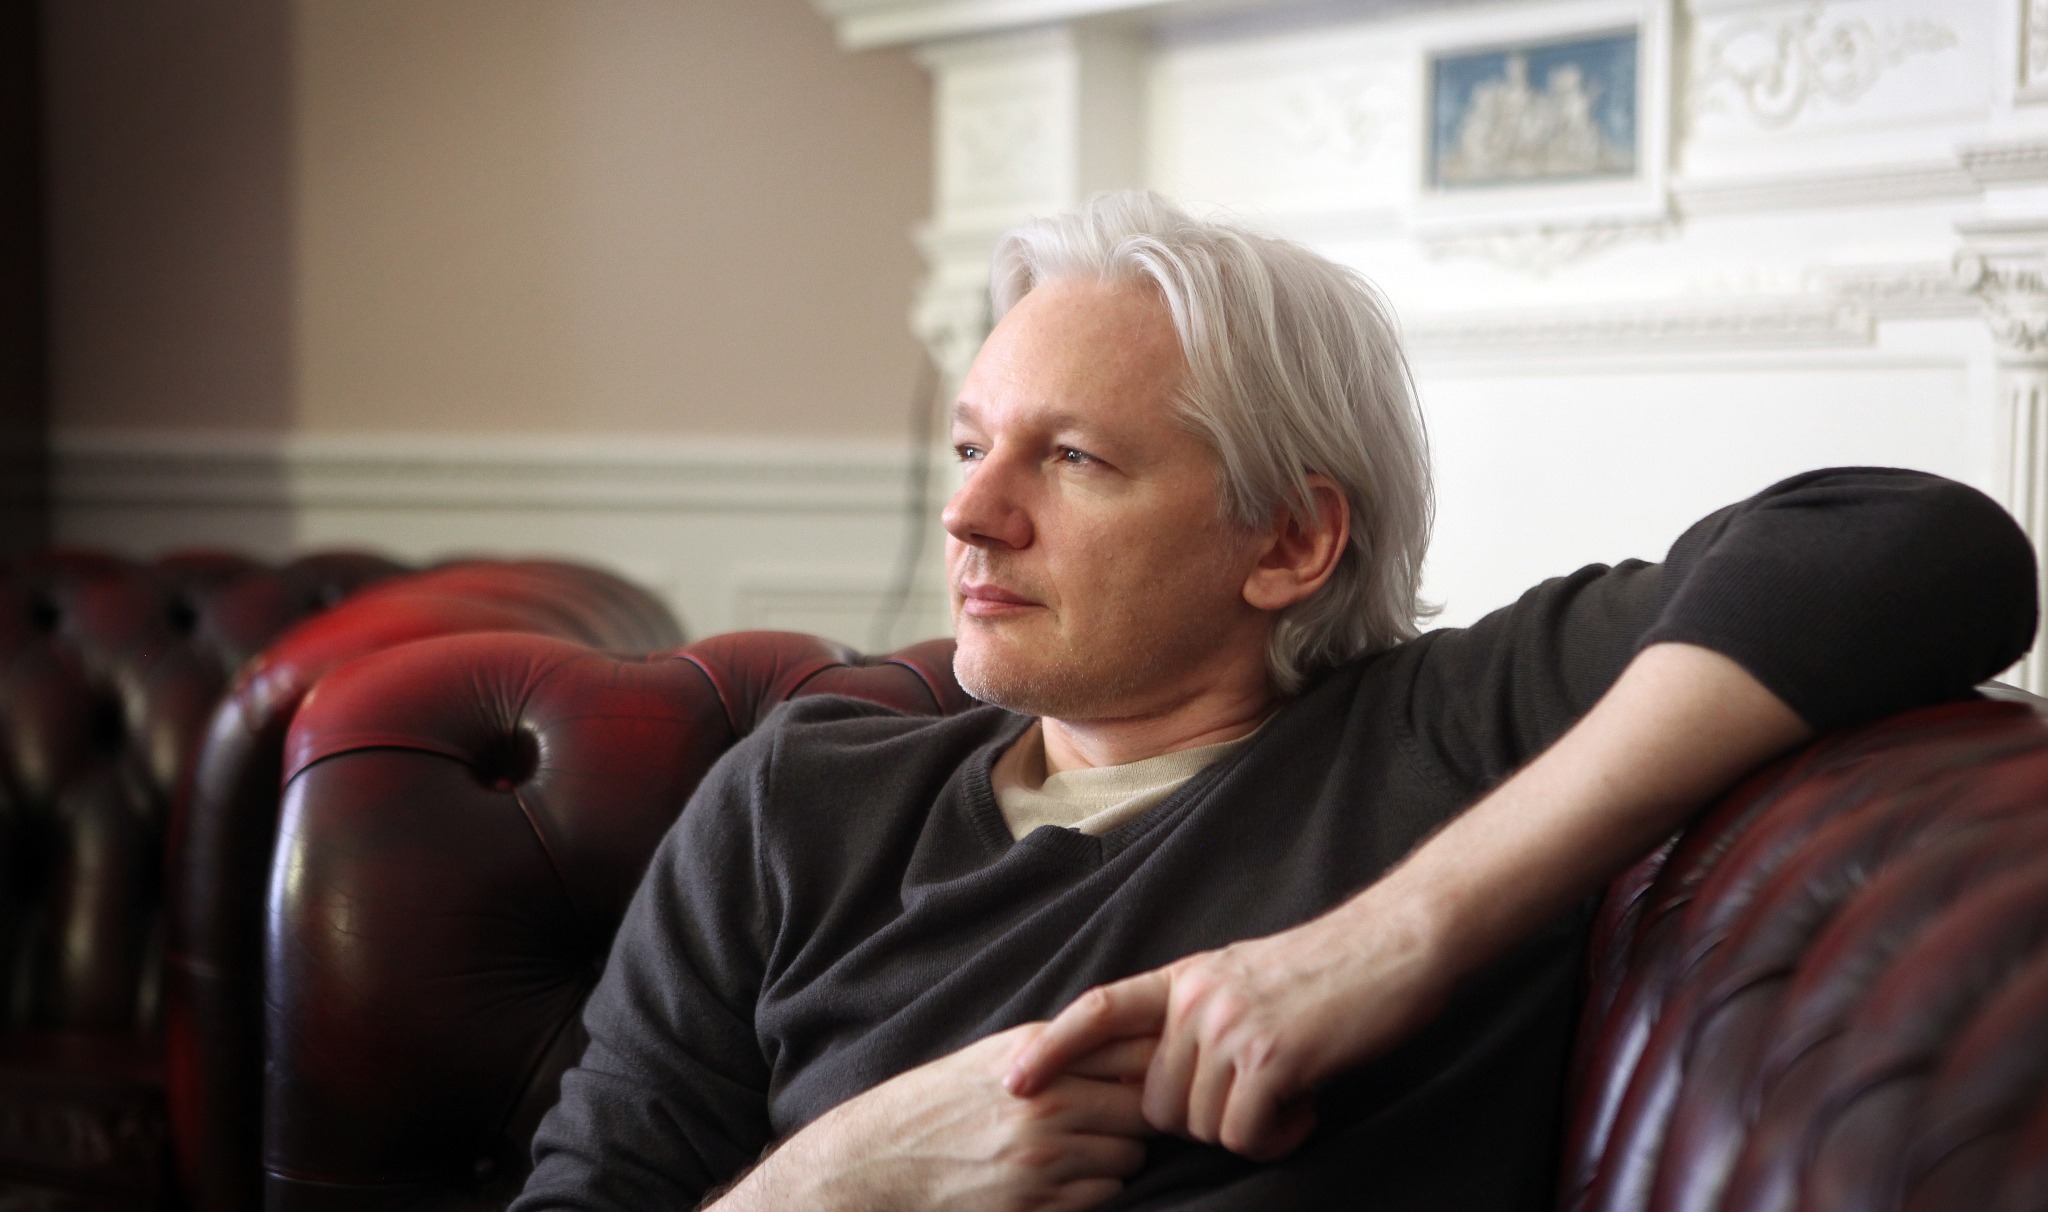 Assange extradition case has cost British public over £300,000